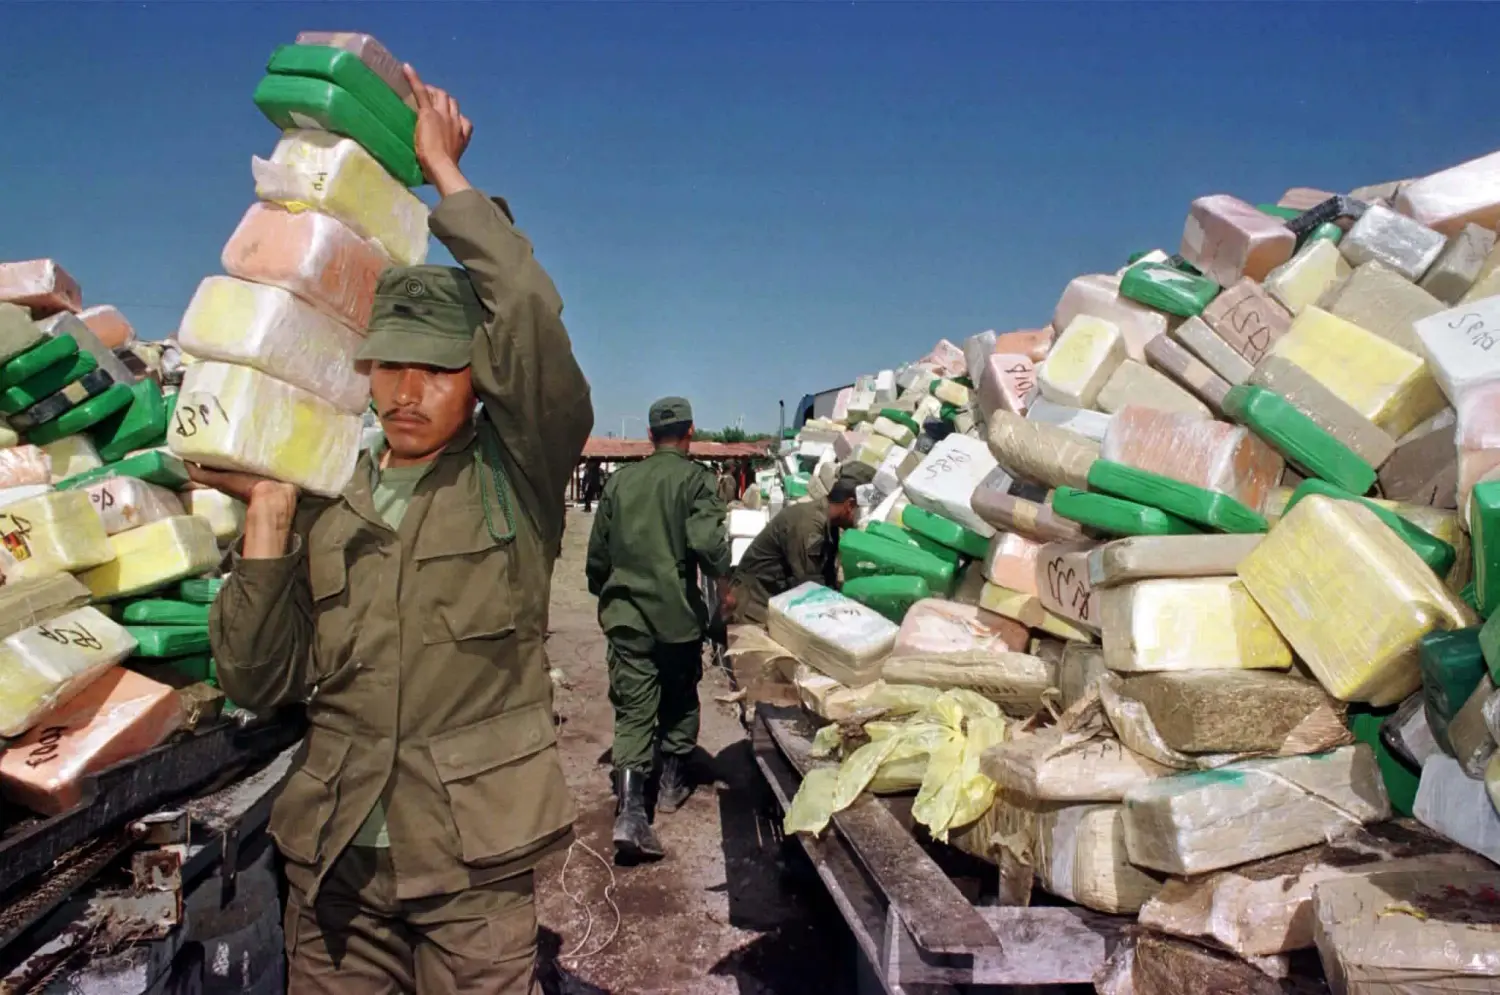 A soldier carries blocks of cocaine to a pile for incineration at a naval base in Matamoros, in Tamaulipas state April 29. Mexican authorities today burnt a 9,871kg haul of Colombian cocaine which was found inside a tanker truck heading for the United states last week. They also incinerated 3,891kg of marijuana. The near ten ton haul represents almost a third of Mexico's average annual cocaine seizures. - RTXHK4Z